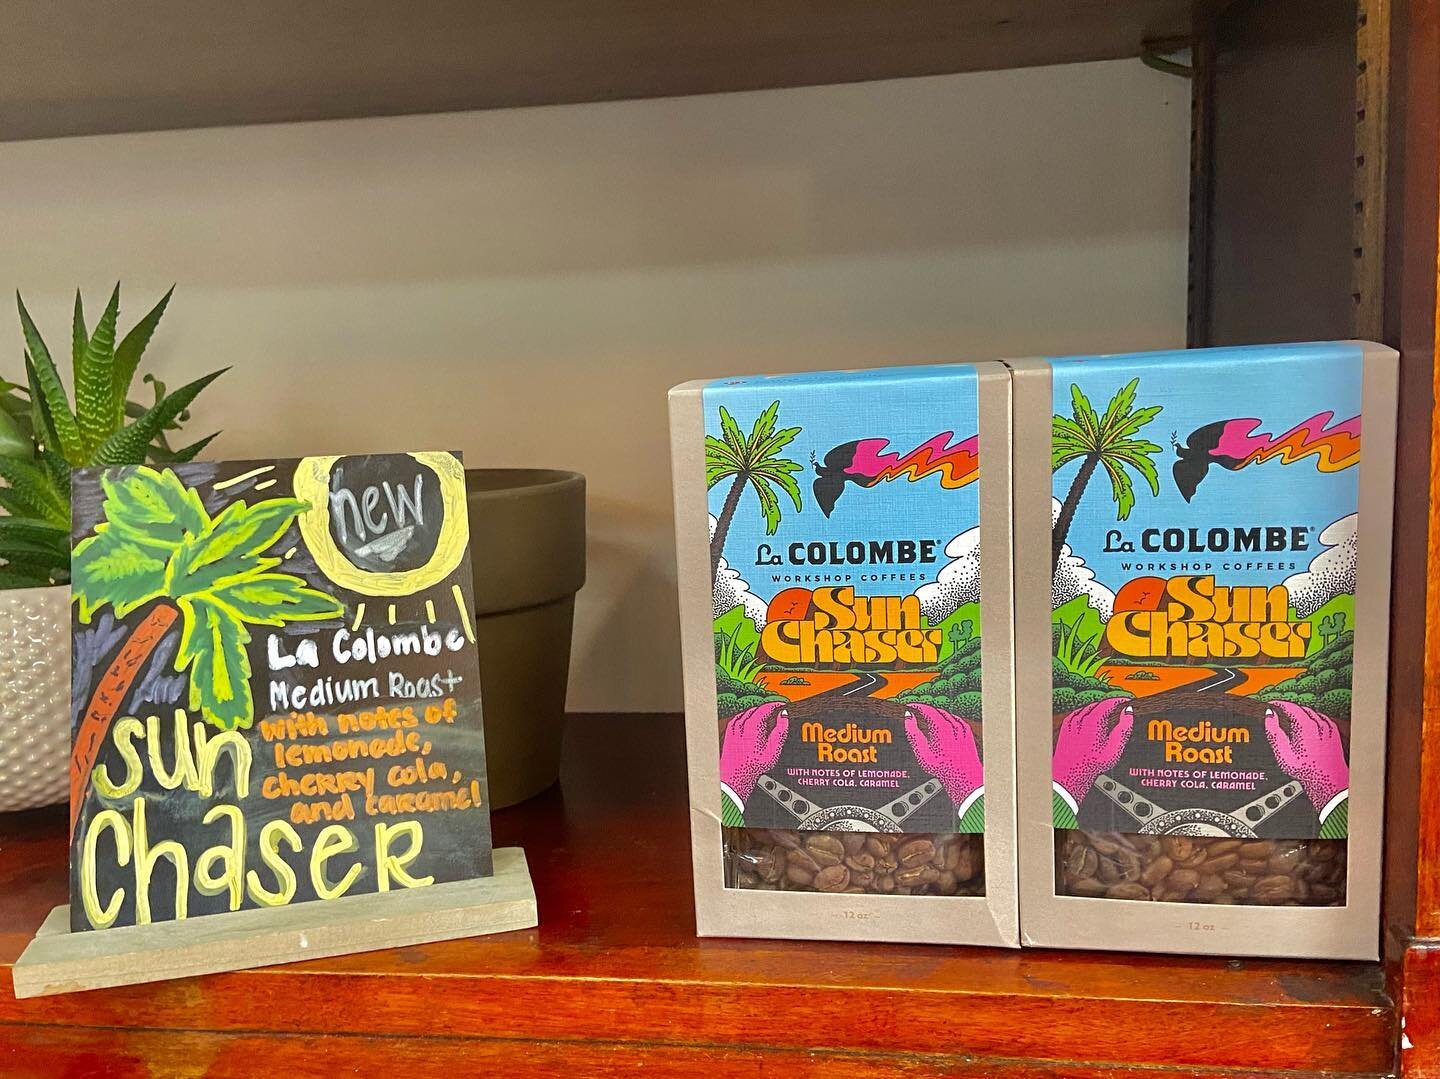 Ready for that summer feeling? Try La Colombe&rsquo;s new Medium Roast coffee, Sun Chaser. With notes of lemonade, cherry cola, and caramel it is perfect for the summer months. Stop in and purchase a box today! 

#lacolombe #lacolombecoffee #narberth